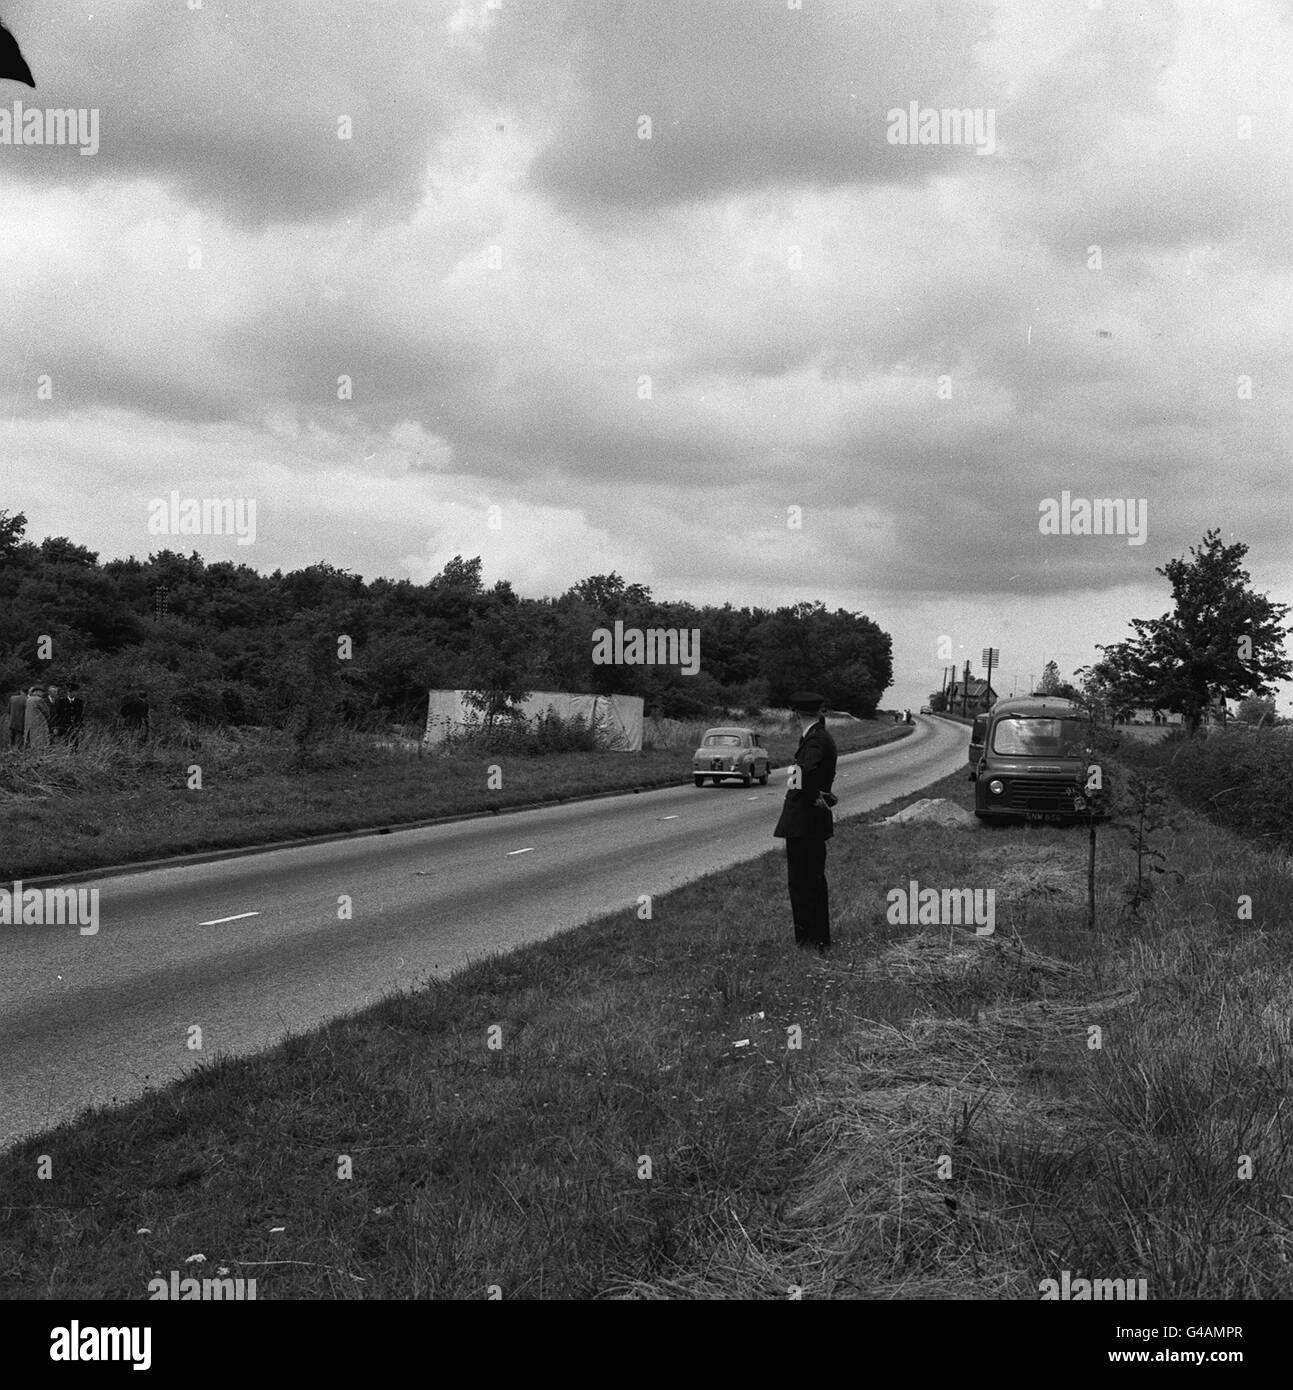 PA NEWS PHOTO 23/8/61 DEAD MAN'S HILL IN CLOPHILL, BEDFORDSHIRE WHERE A MAN WAS SHOT DEAD AND A WOMAN SERIOUSLY INJURED IN A LAY-BY ON THE A6 MAIN ROAD. THE WOMAN A RED HEAD WHO WAS SHOT THROUGH THE CHEST AND IS CRITICALLY ILL TOLD THE POLICE THAT THEY HAD BEEN SHOT BY A MAN WHO THUMBED A LIFT IN THEIR CAR AT SLOUGH, BUCKS WHERE HE SHOT THEM BOTH. LAST NIGHT DETECTIVES RUSHED TO THE SCENE WITH TRACKER DOGS TO COMB ROUGH SCRUBLAND NEAR THE LAY BY. A POLICEMAN SPOKESMAN SAID 'IT SEEMS MOST LIKELY THAT THE GUNMAN IS MILES AWAY IN THE CAR BY NOW' Stock Photo